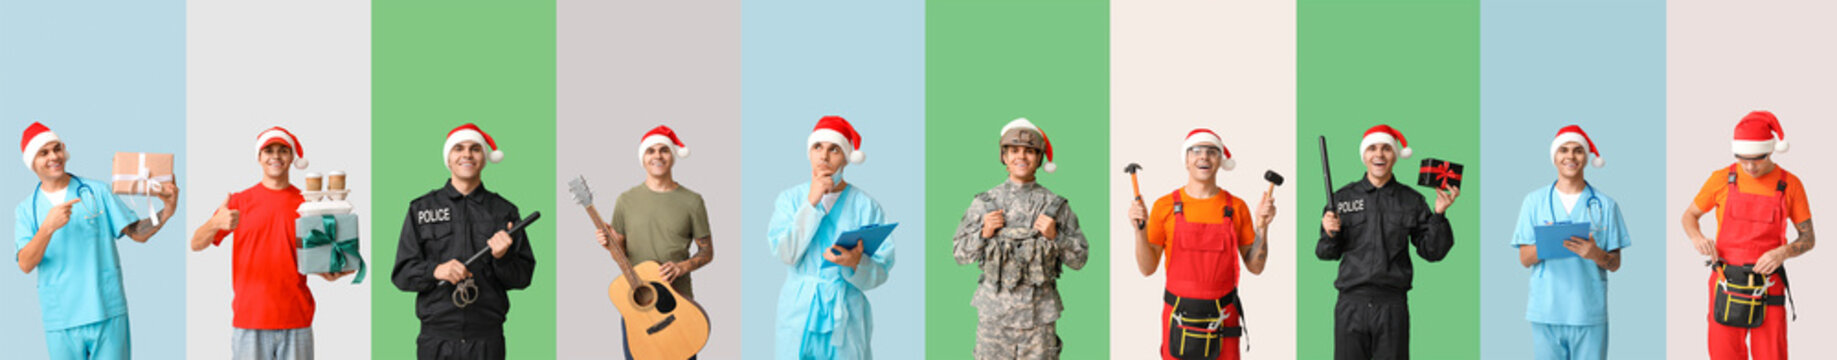 Collage of young man in uniforms of different professions on color background. Happy New Year and Christmas celebration